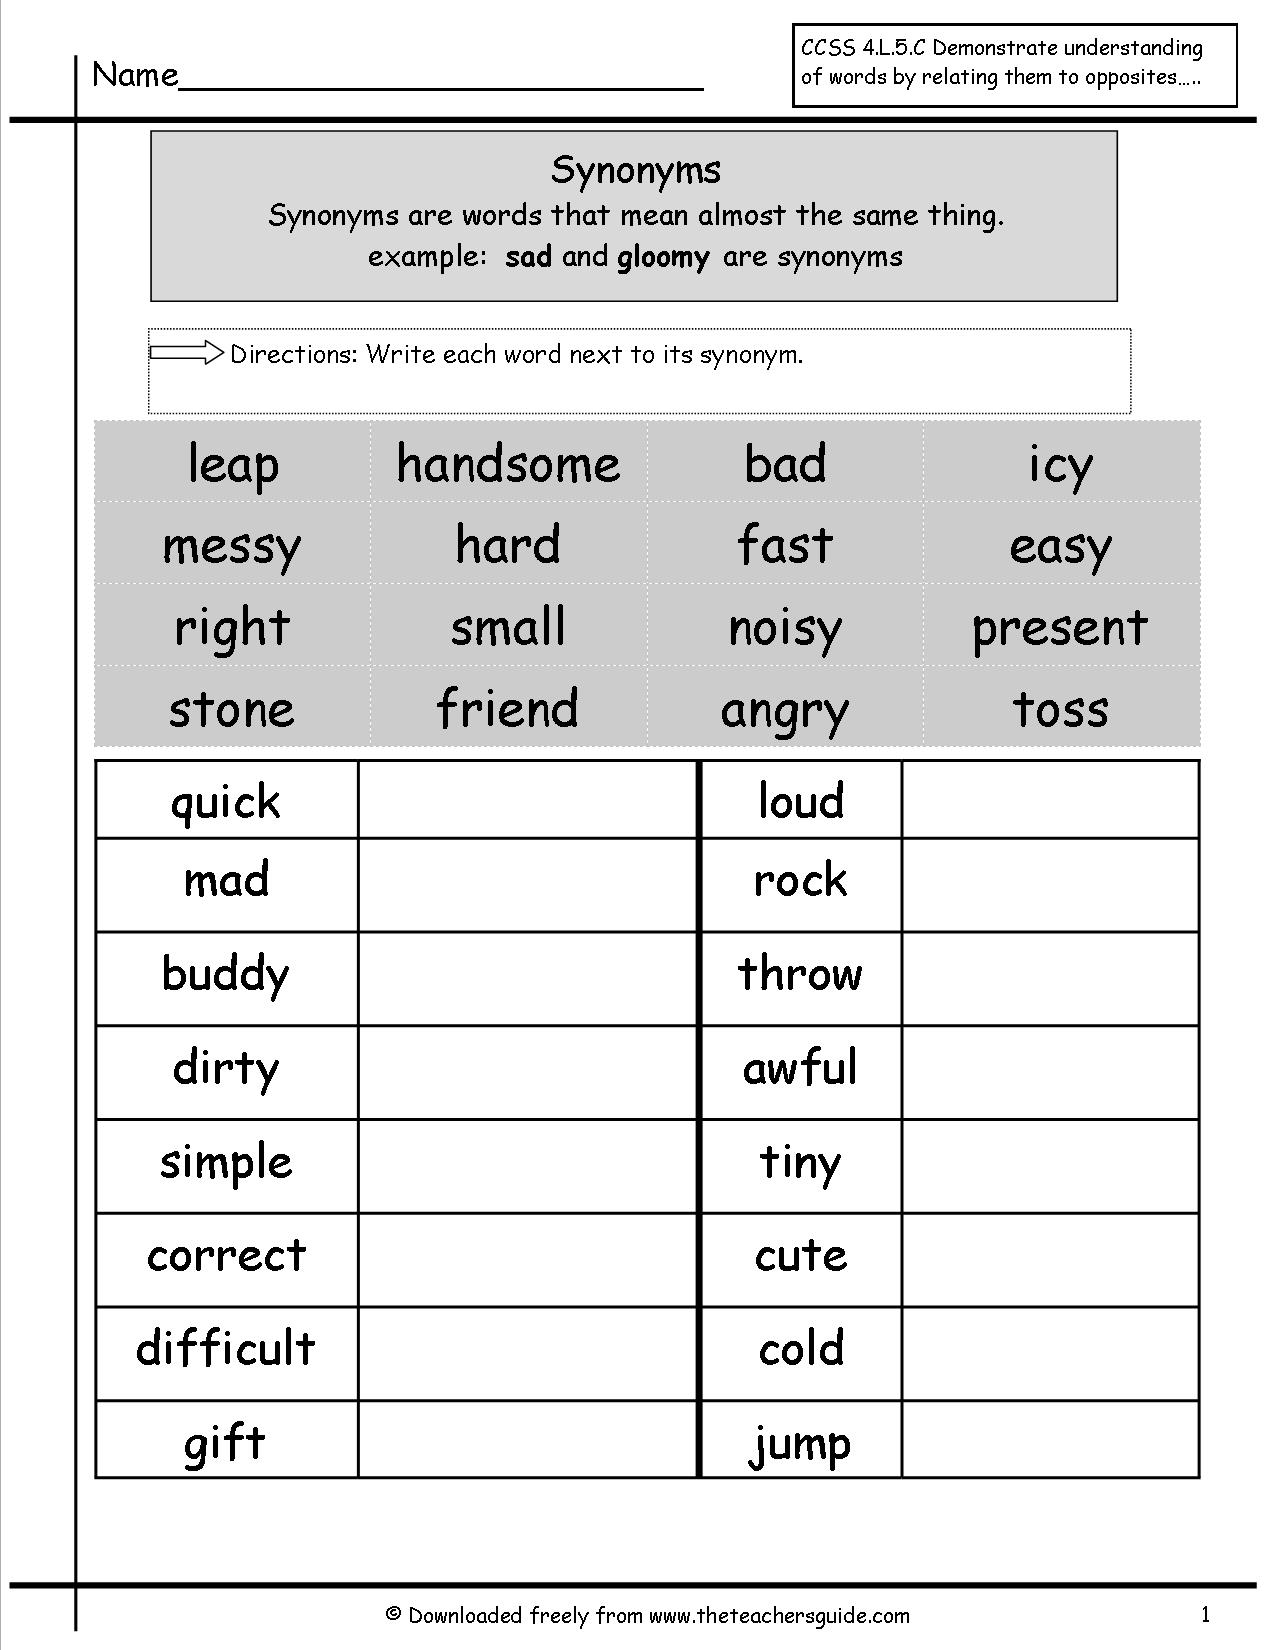 18 Synonyms Worksheets Middle School / worksheeto com